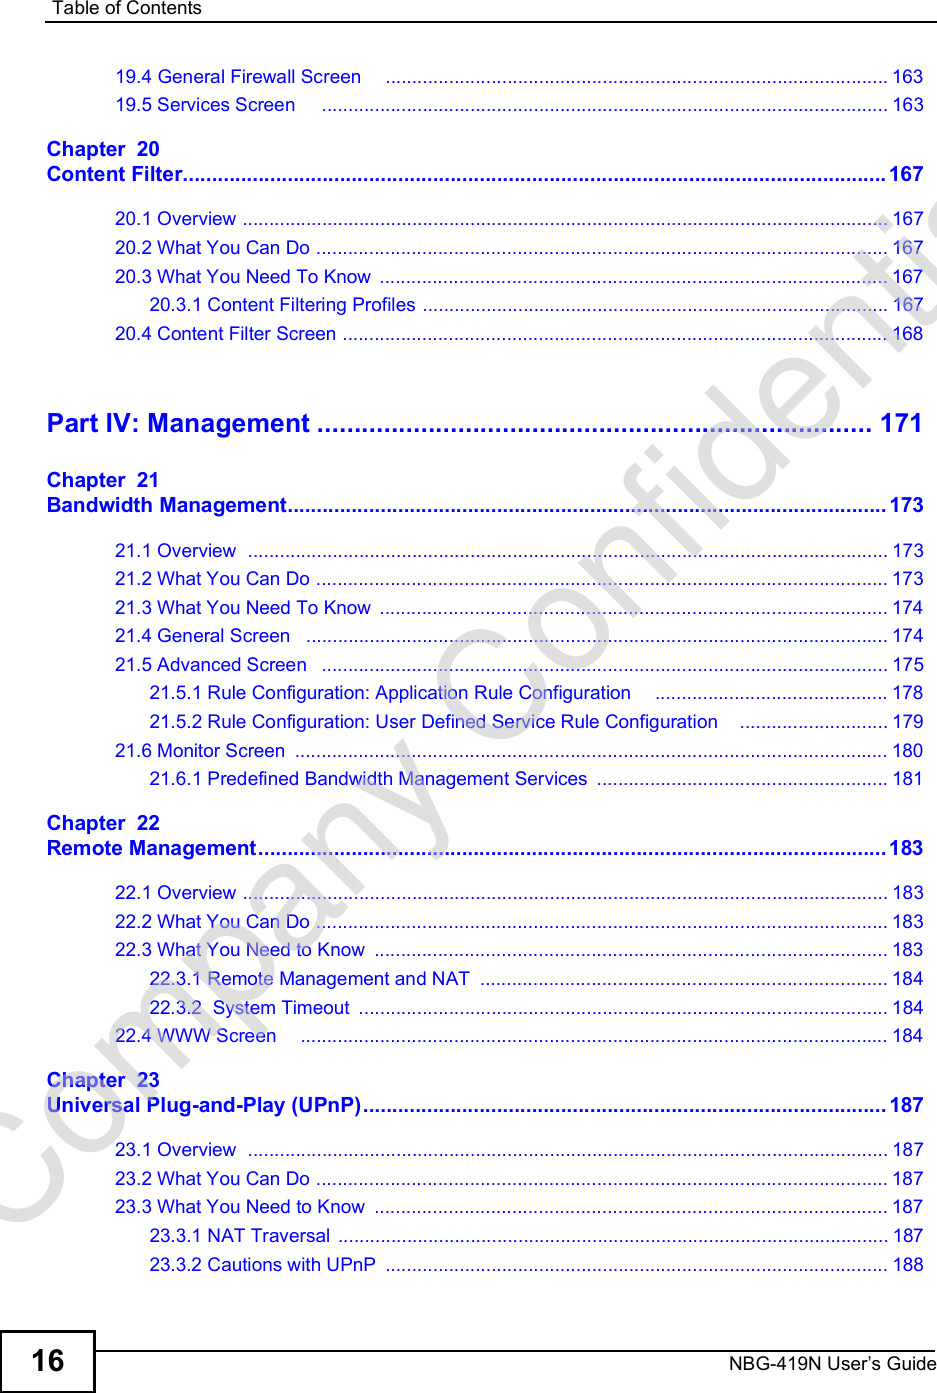 Table of ContentsNBG-419N User s Guide1619.4 General Firewall Screen    ...............................................................................................16319.5 Services Screen    ...........................................................................................................163Chapter  20Content Filter.........................................................................................................................16720.1 Overview ..........................................................................................................................16720.2 What You Can Do ............................................................................................................16720.3 What You Need To Know ................................................................................................16720.3.1 Content Filtering Profiles ........................................................................................16720.4 Content Filter Screen .......................................................................................................168Part IV: Management...........................................................................171Chapter  21Bandwidth Management.......................................................................................................17321.1 Overview  .........................................................................................................................17321.2 What You Can Do ............................................................................................................17321.3 What You Need To Know ................................................................................................17421.4 General Screen  ..............................................................................................................17421.5 Advanced Screen  ...........................................................................................................17521.5.1 Rule Configuration: Application Rule Configuration    ............................................17821.5.2 Rule Configuration: User Defined Service Rule Configuration    ............................17921.6 Monitor Screen ................................................................................................................18021.6.1 Predefined Bandwidth Management Services .......................................................181Chapter  22Remote Management............................................................................................................18322.1 Overview ..........................................................................................................................18322.2 What You Can Do ............................................................................................................18322.3 What You Need to Know .................................................................................................18322.3.1 Remote Management and NAT .............................................................................18422.3.2  System Timeout ....................................................................................................18422.4 WWW Screen    ...............................................................................................................184Chapter  23Universal Plug-and-Play (UPnP)..........................................................................................18723.1 Overview  .........................................................................................................................18723.2 What You Can Do ............................................................................................................18723.3 What You Need to Know .................................................................................................18723.3.1 NAT Traversal ........................................................................................................18723.3.2 Cautions with UPnP ...............................................................................................188Company Confidential